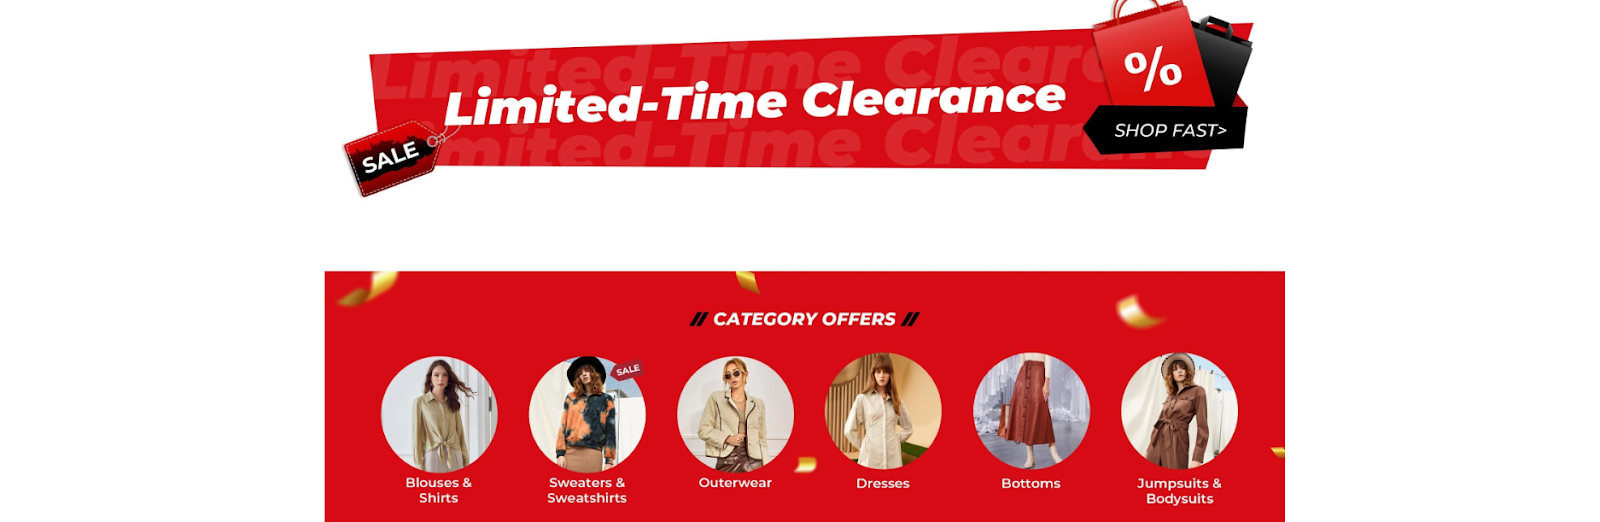 SHEIN clearance and sales page